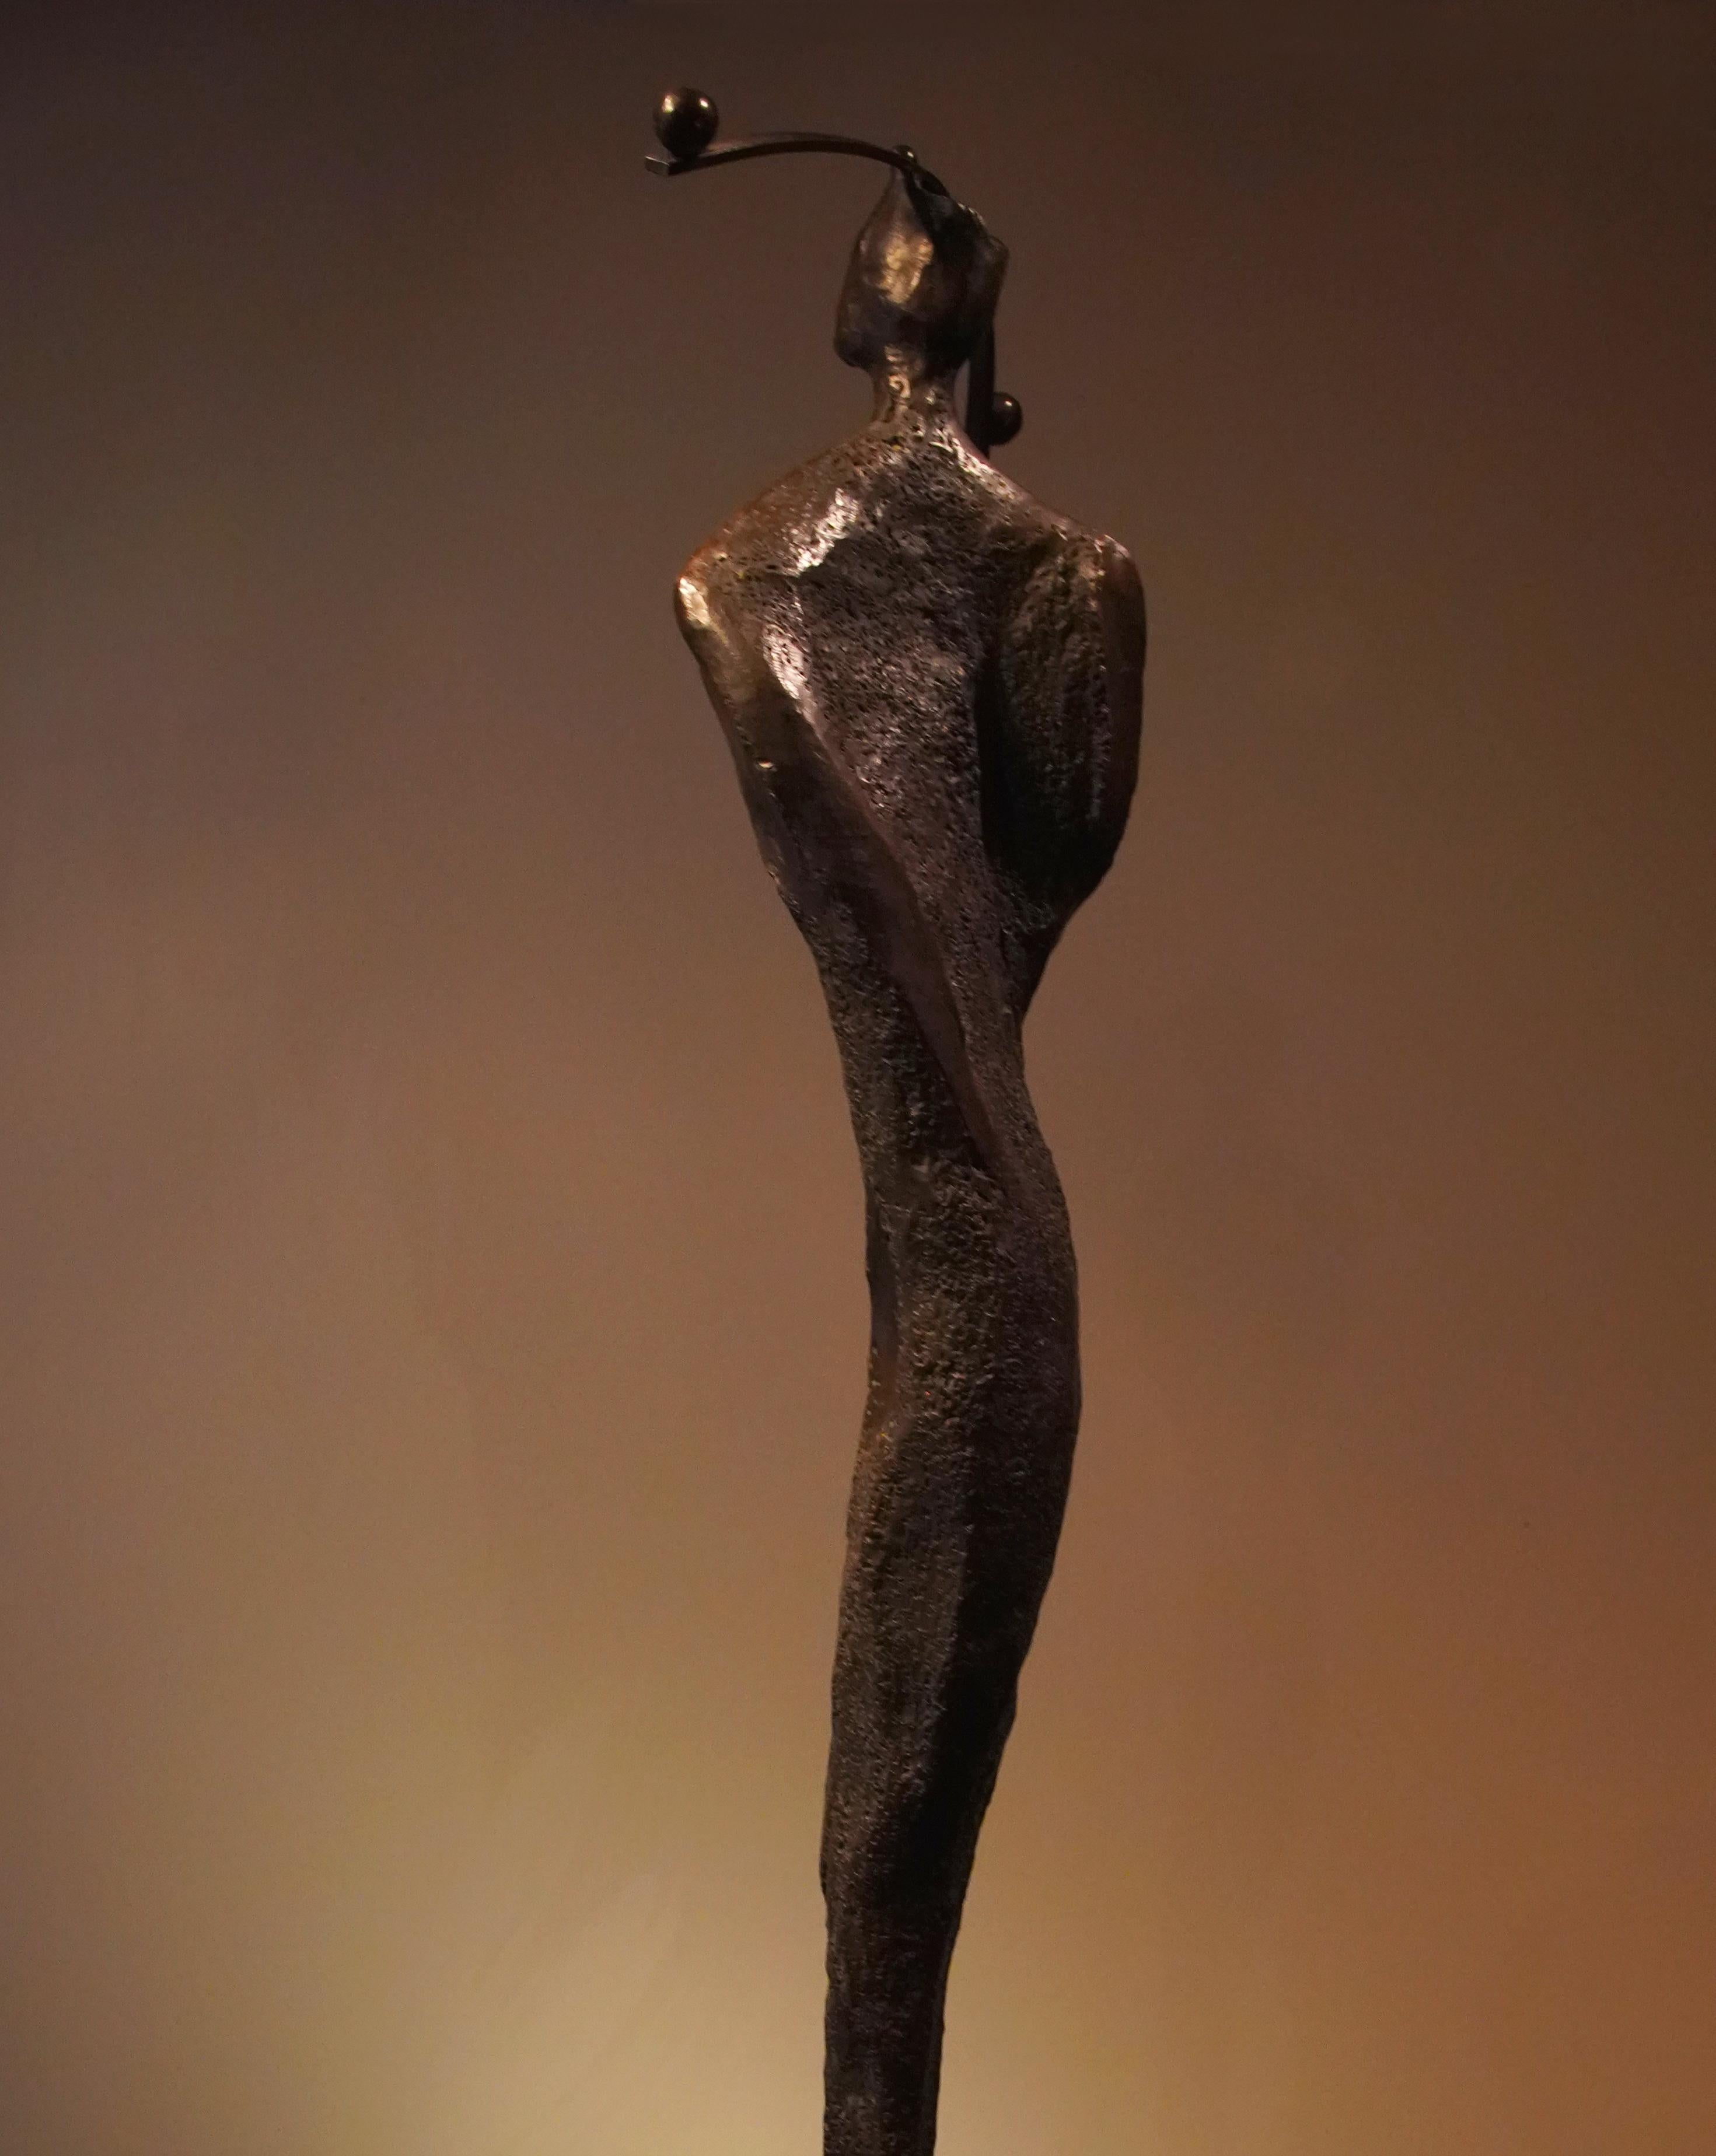 Guard 8 - Abstract Sculpture by Frank Arnold